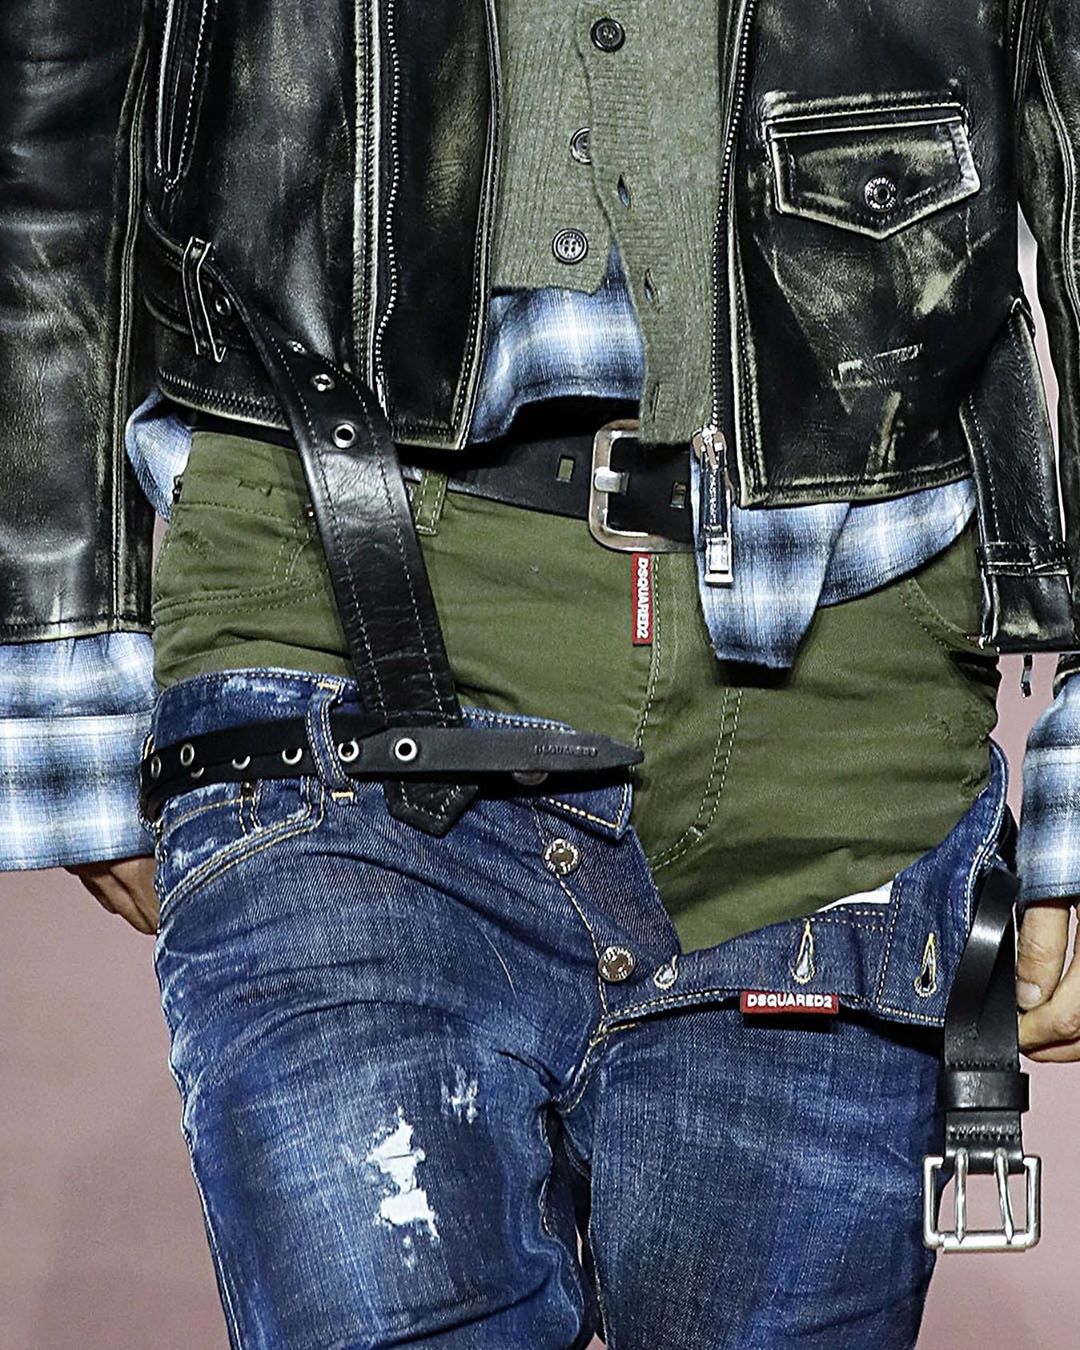 DSQUARED2  - Dean & Dan Caten - #D2FW20: #D2Denim upgrade. Discover the new collection on Dsquared2.com #dsquared2